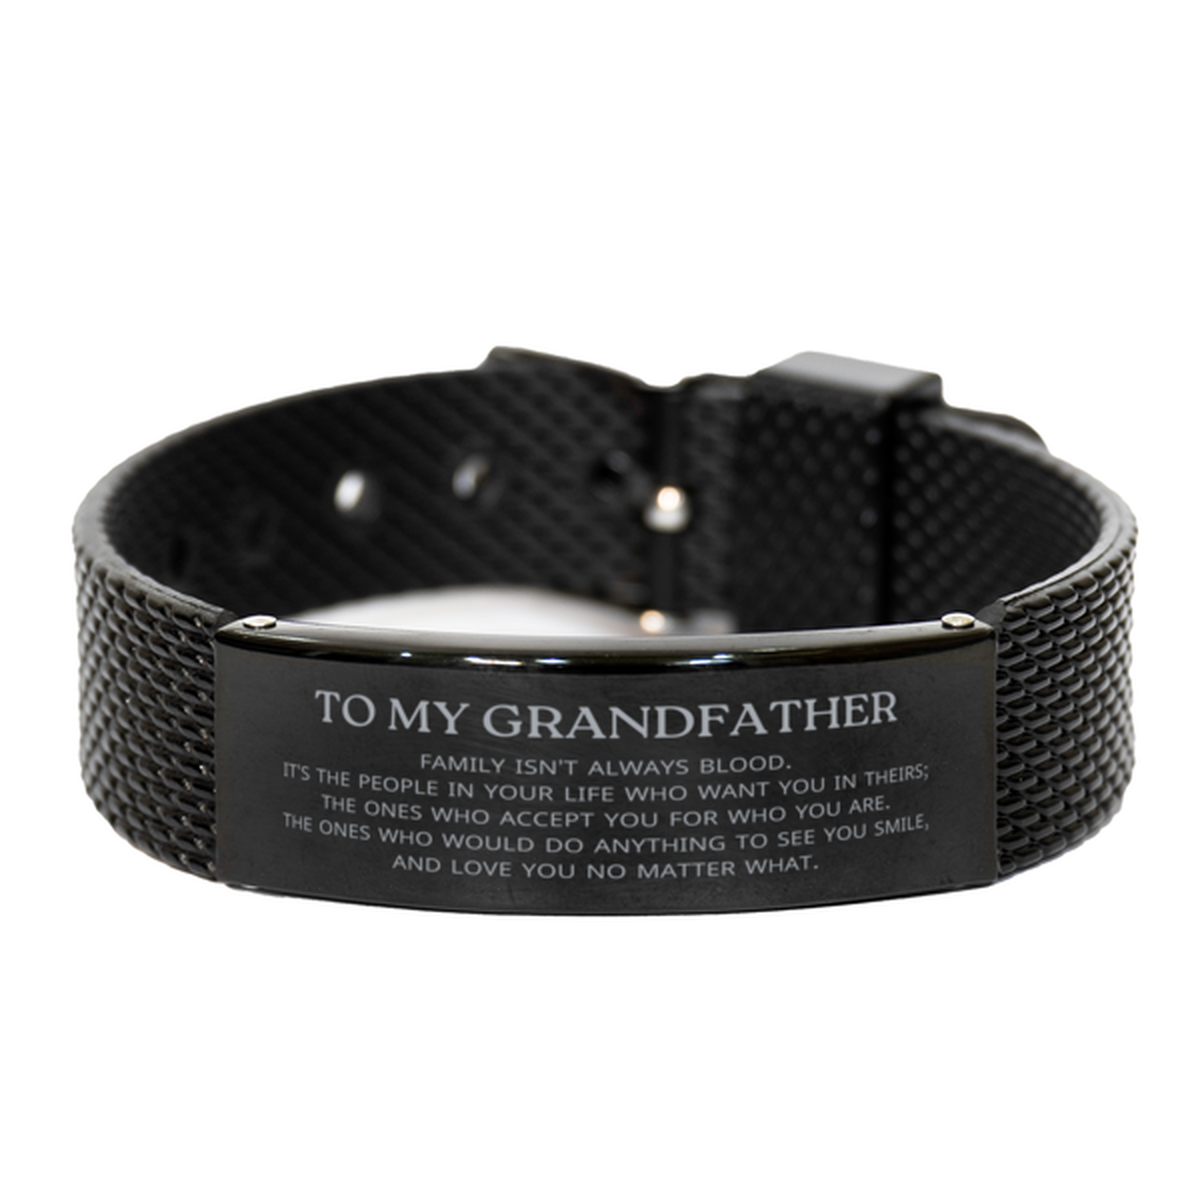 To My Grandfather Gifts, Family isn't always blood, Grandfather Black Shark Mesh Bracelet, Birthday Christmas Unique Present For Grandfather